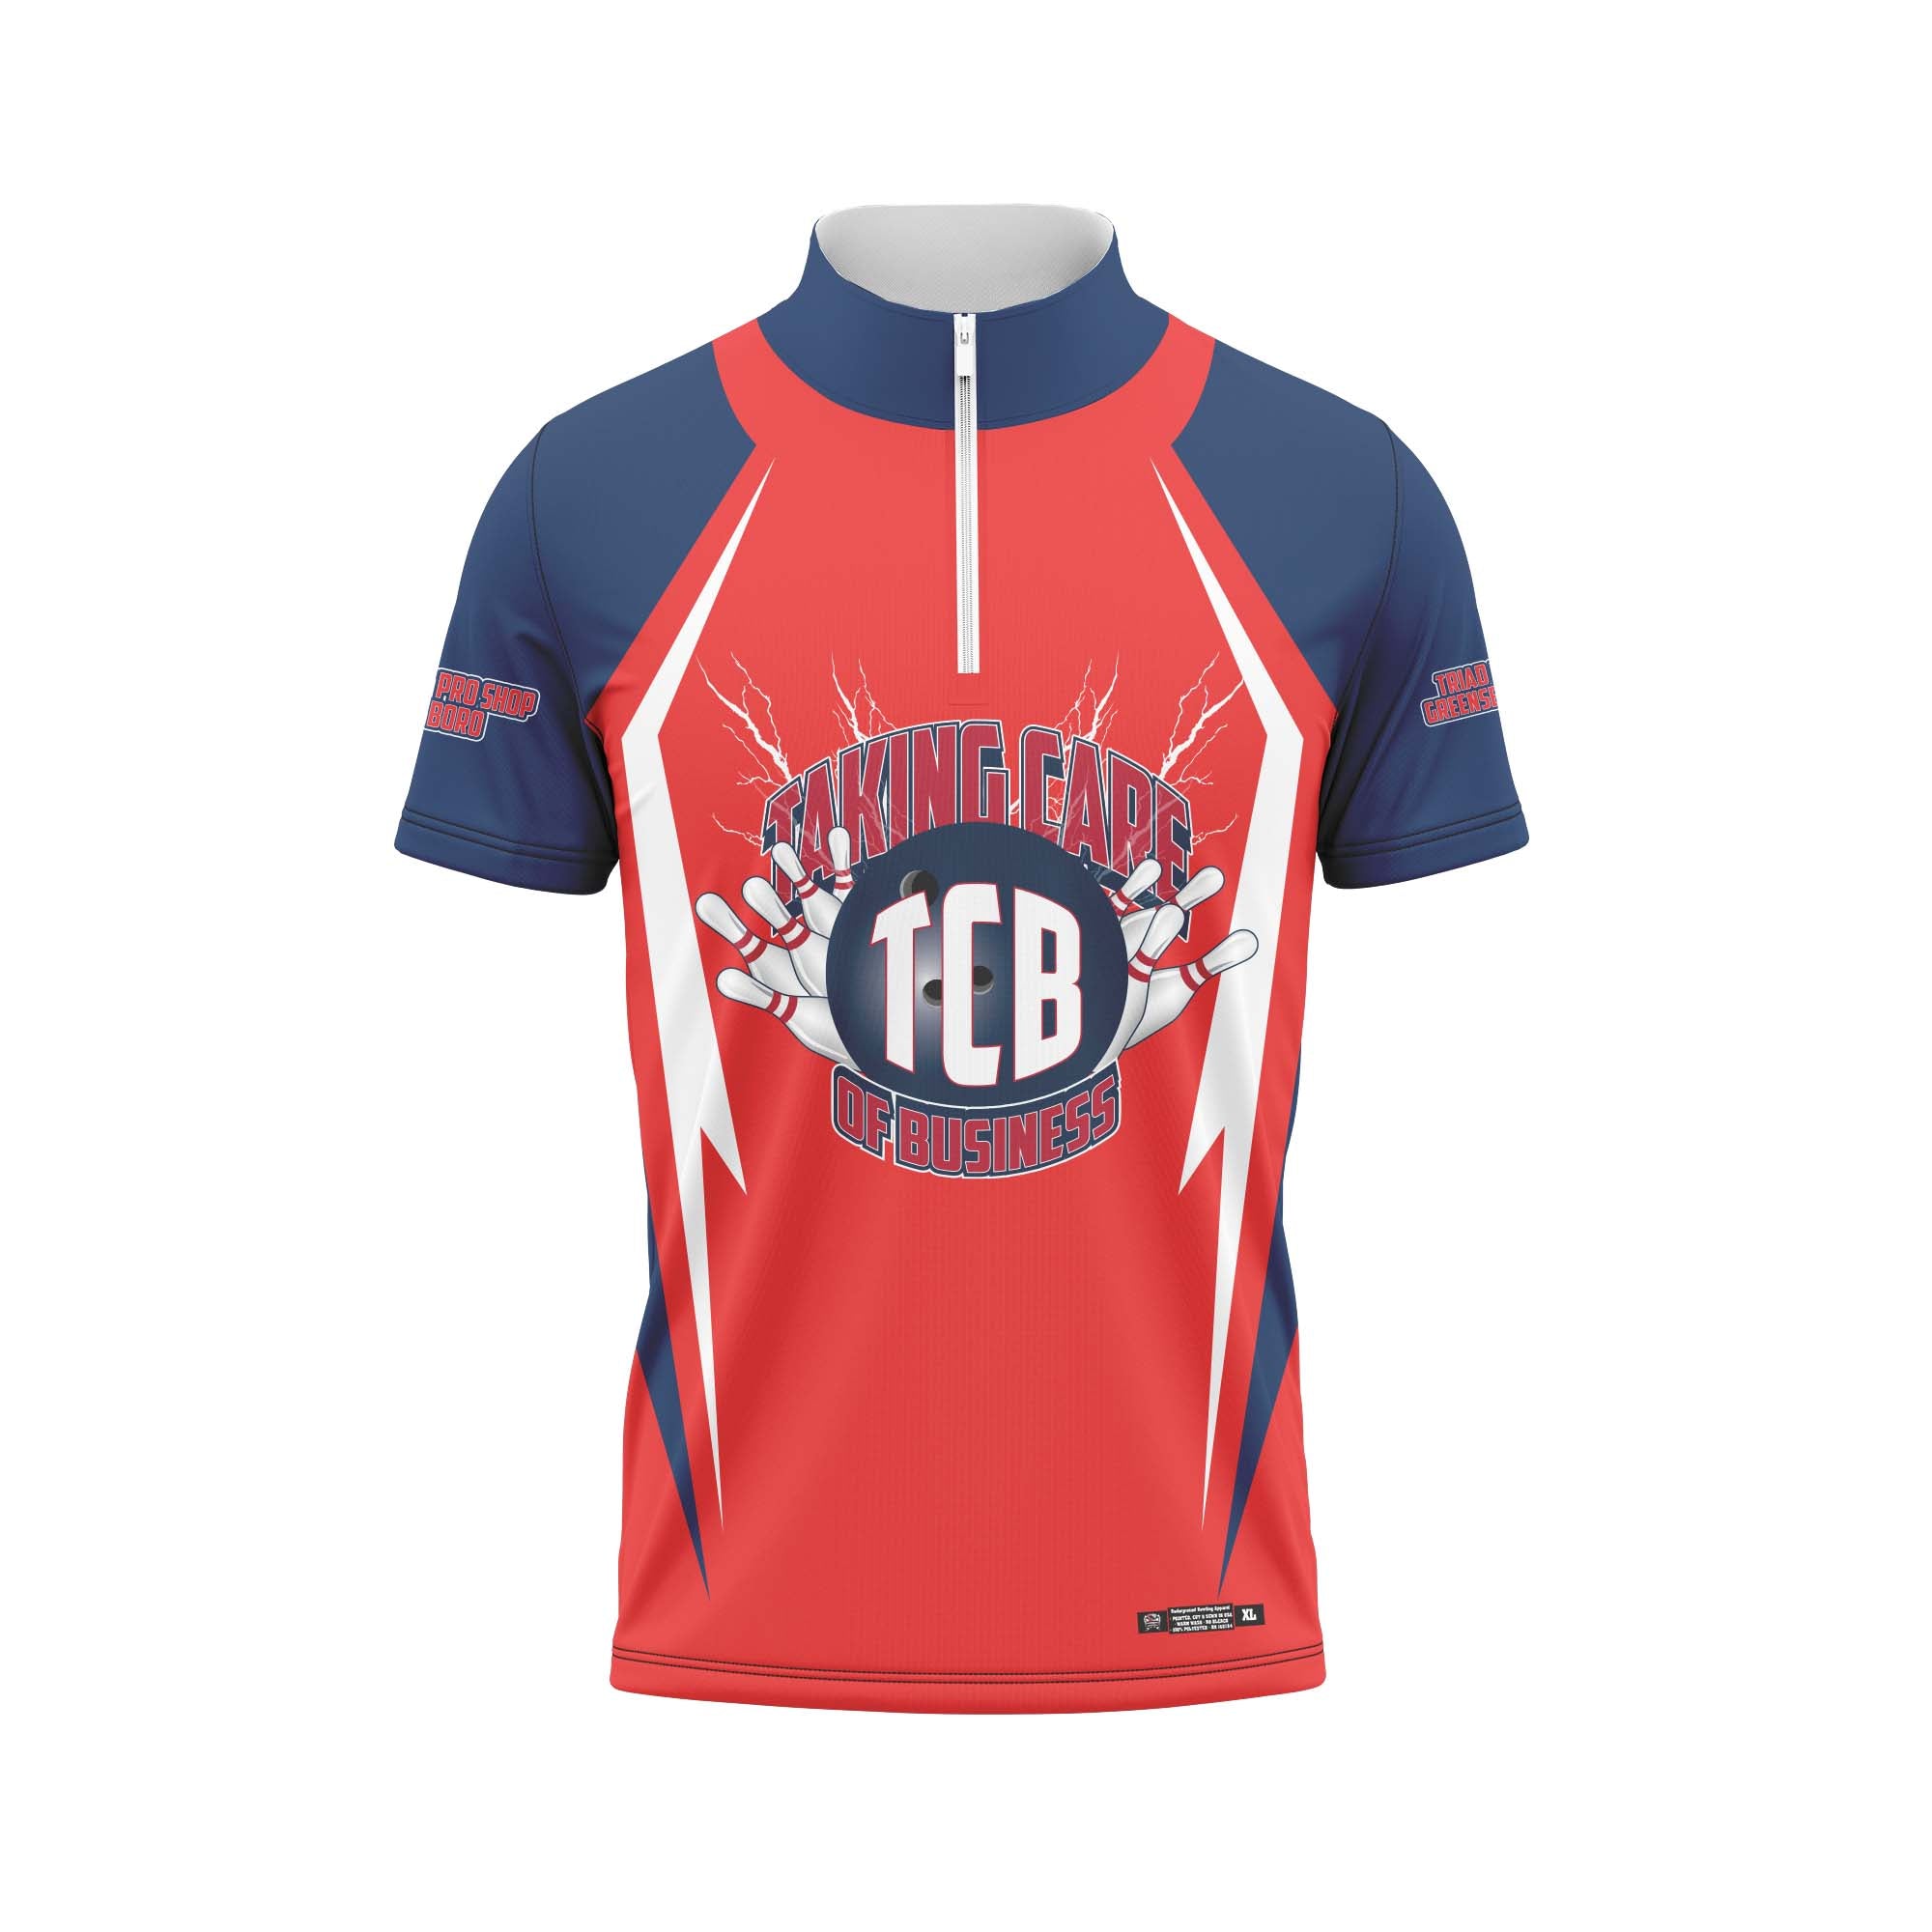 Taking Care Of Business Alternate 106 Jersey